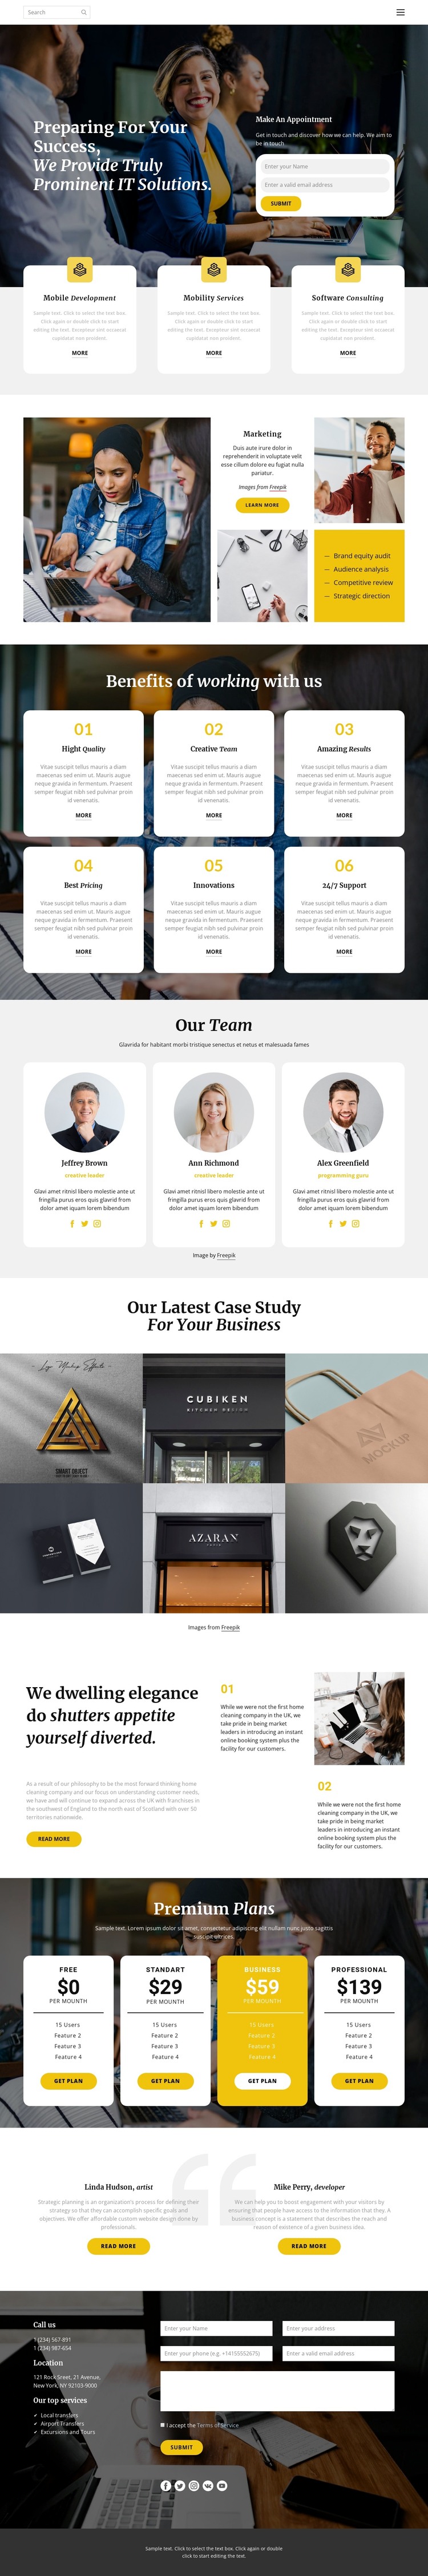 Joint-stock company Web Design